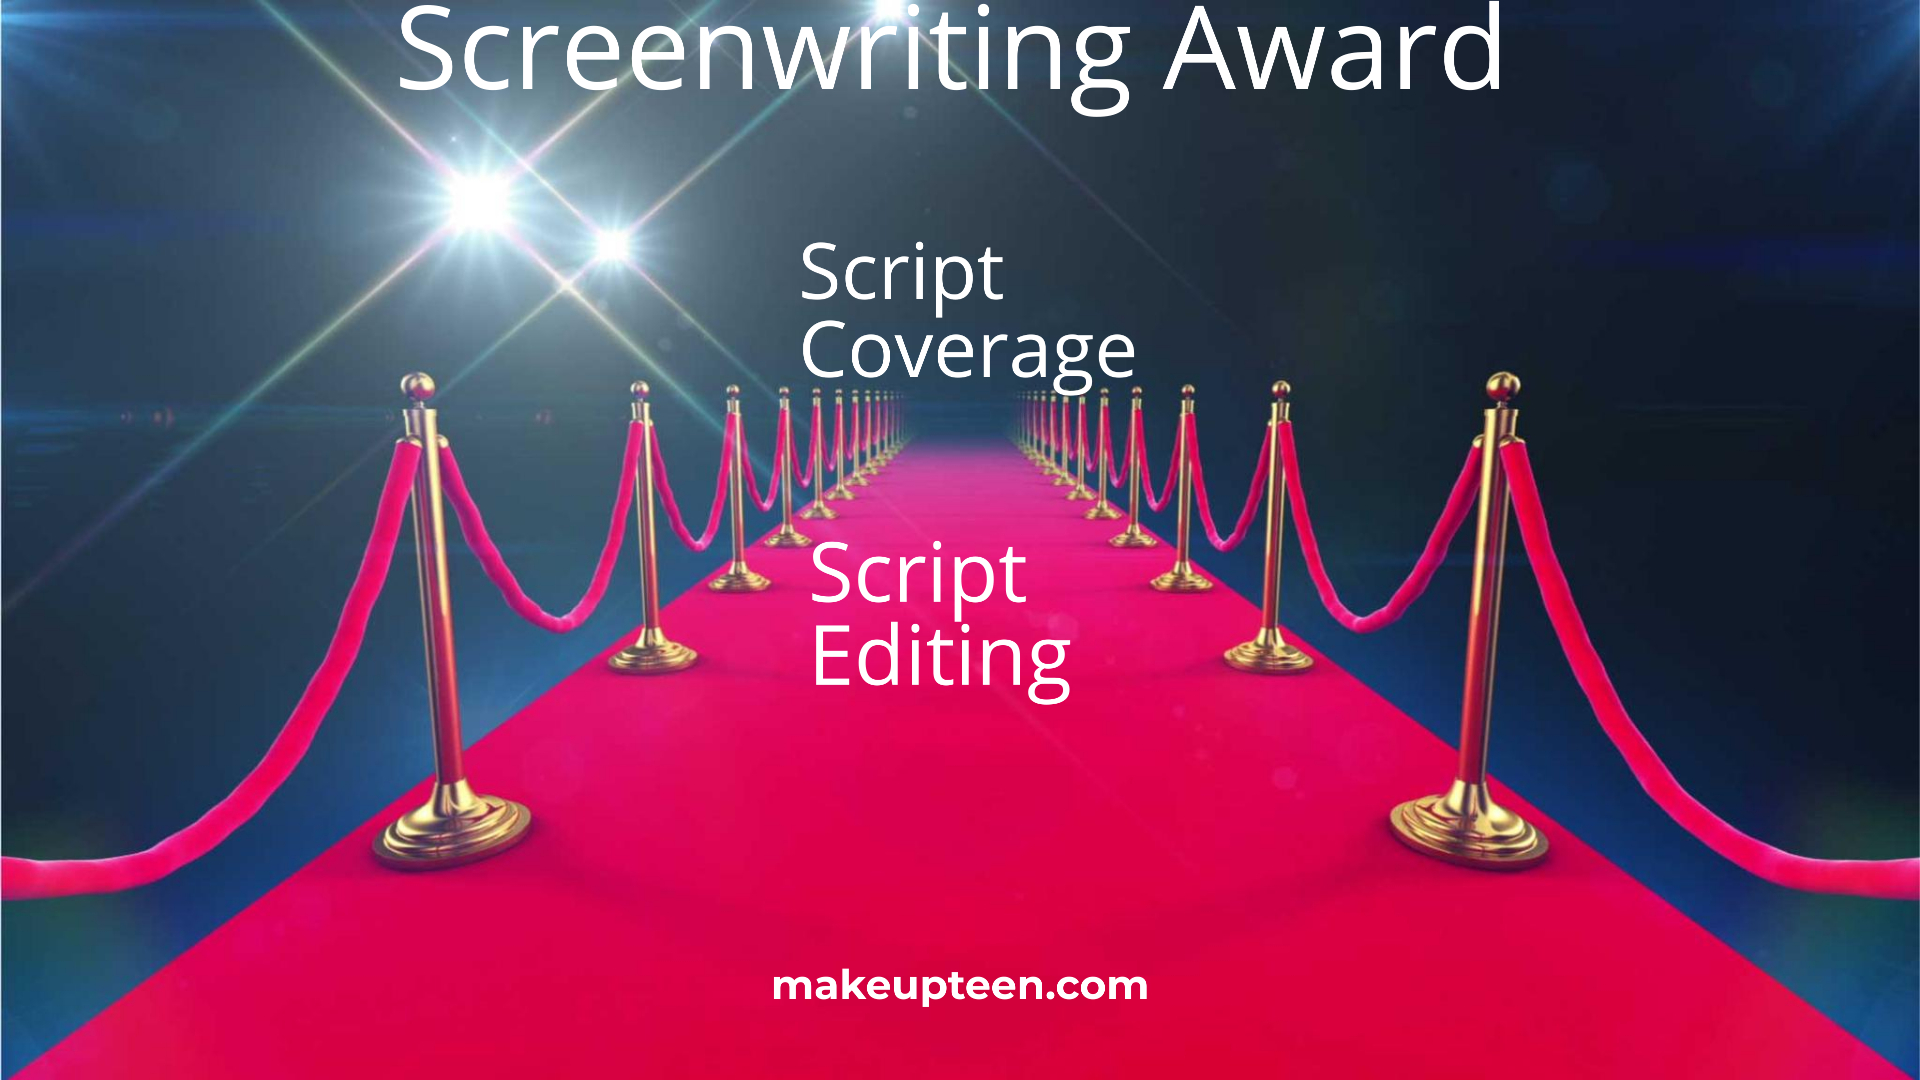 Clare Keogh Editing is offering to do a full coverage analysis of a winning script in the screenplay contest Page Turner Screenplay Award